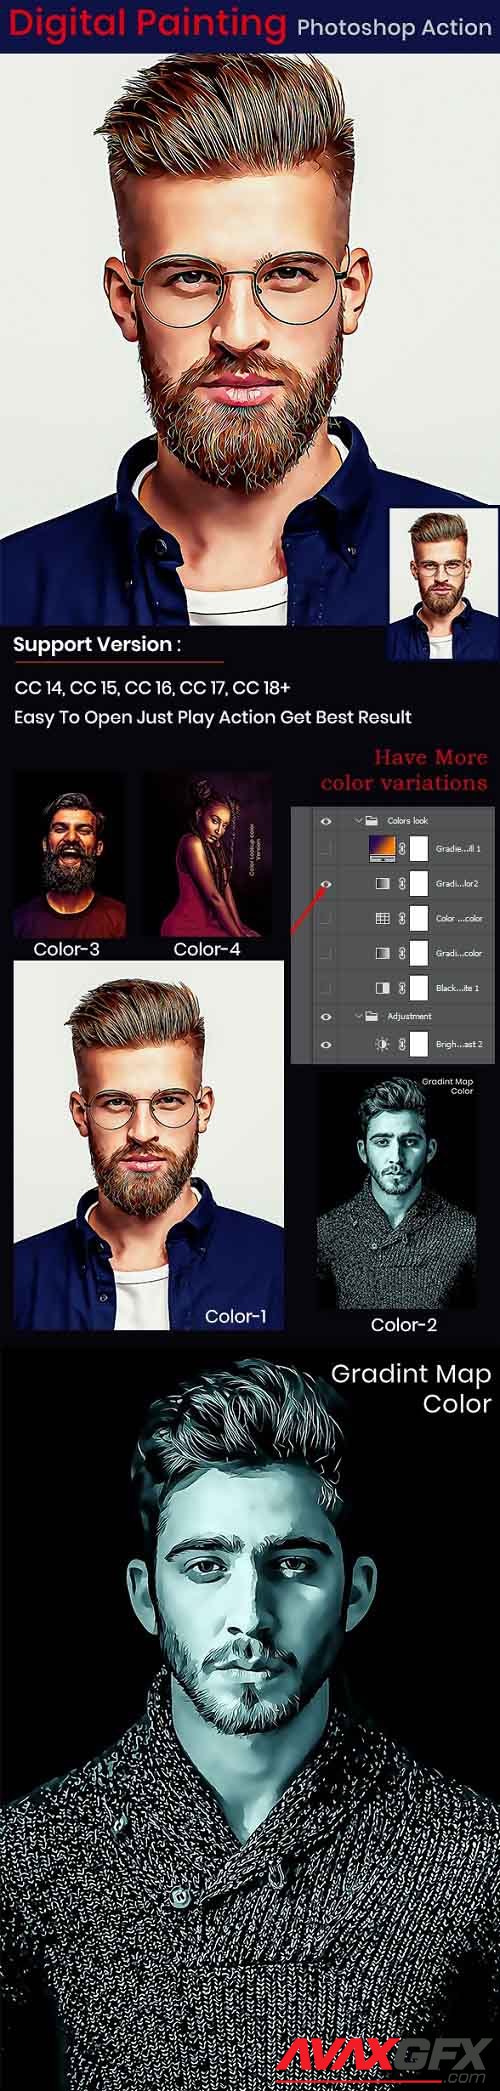 GraphicRiver - Digital Painting Photoshop Action 29902686